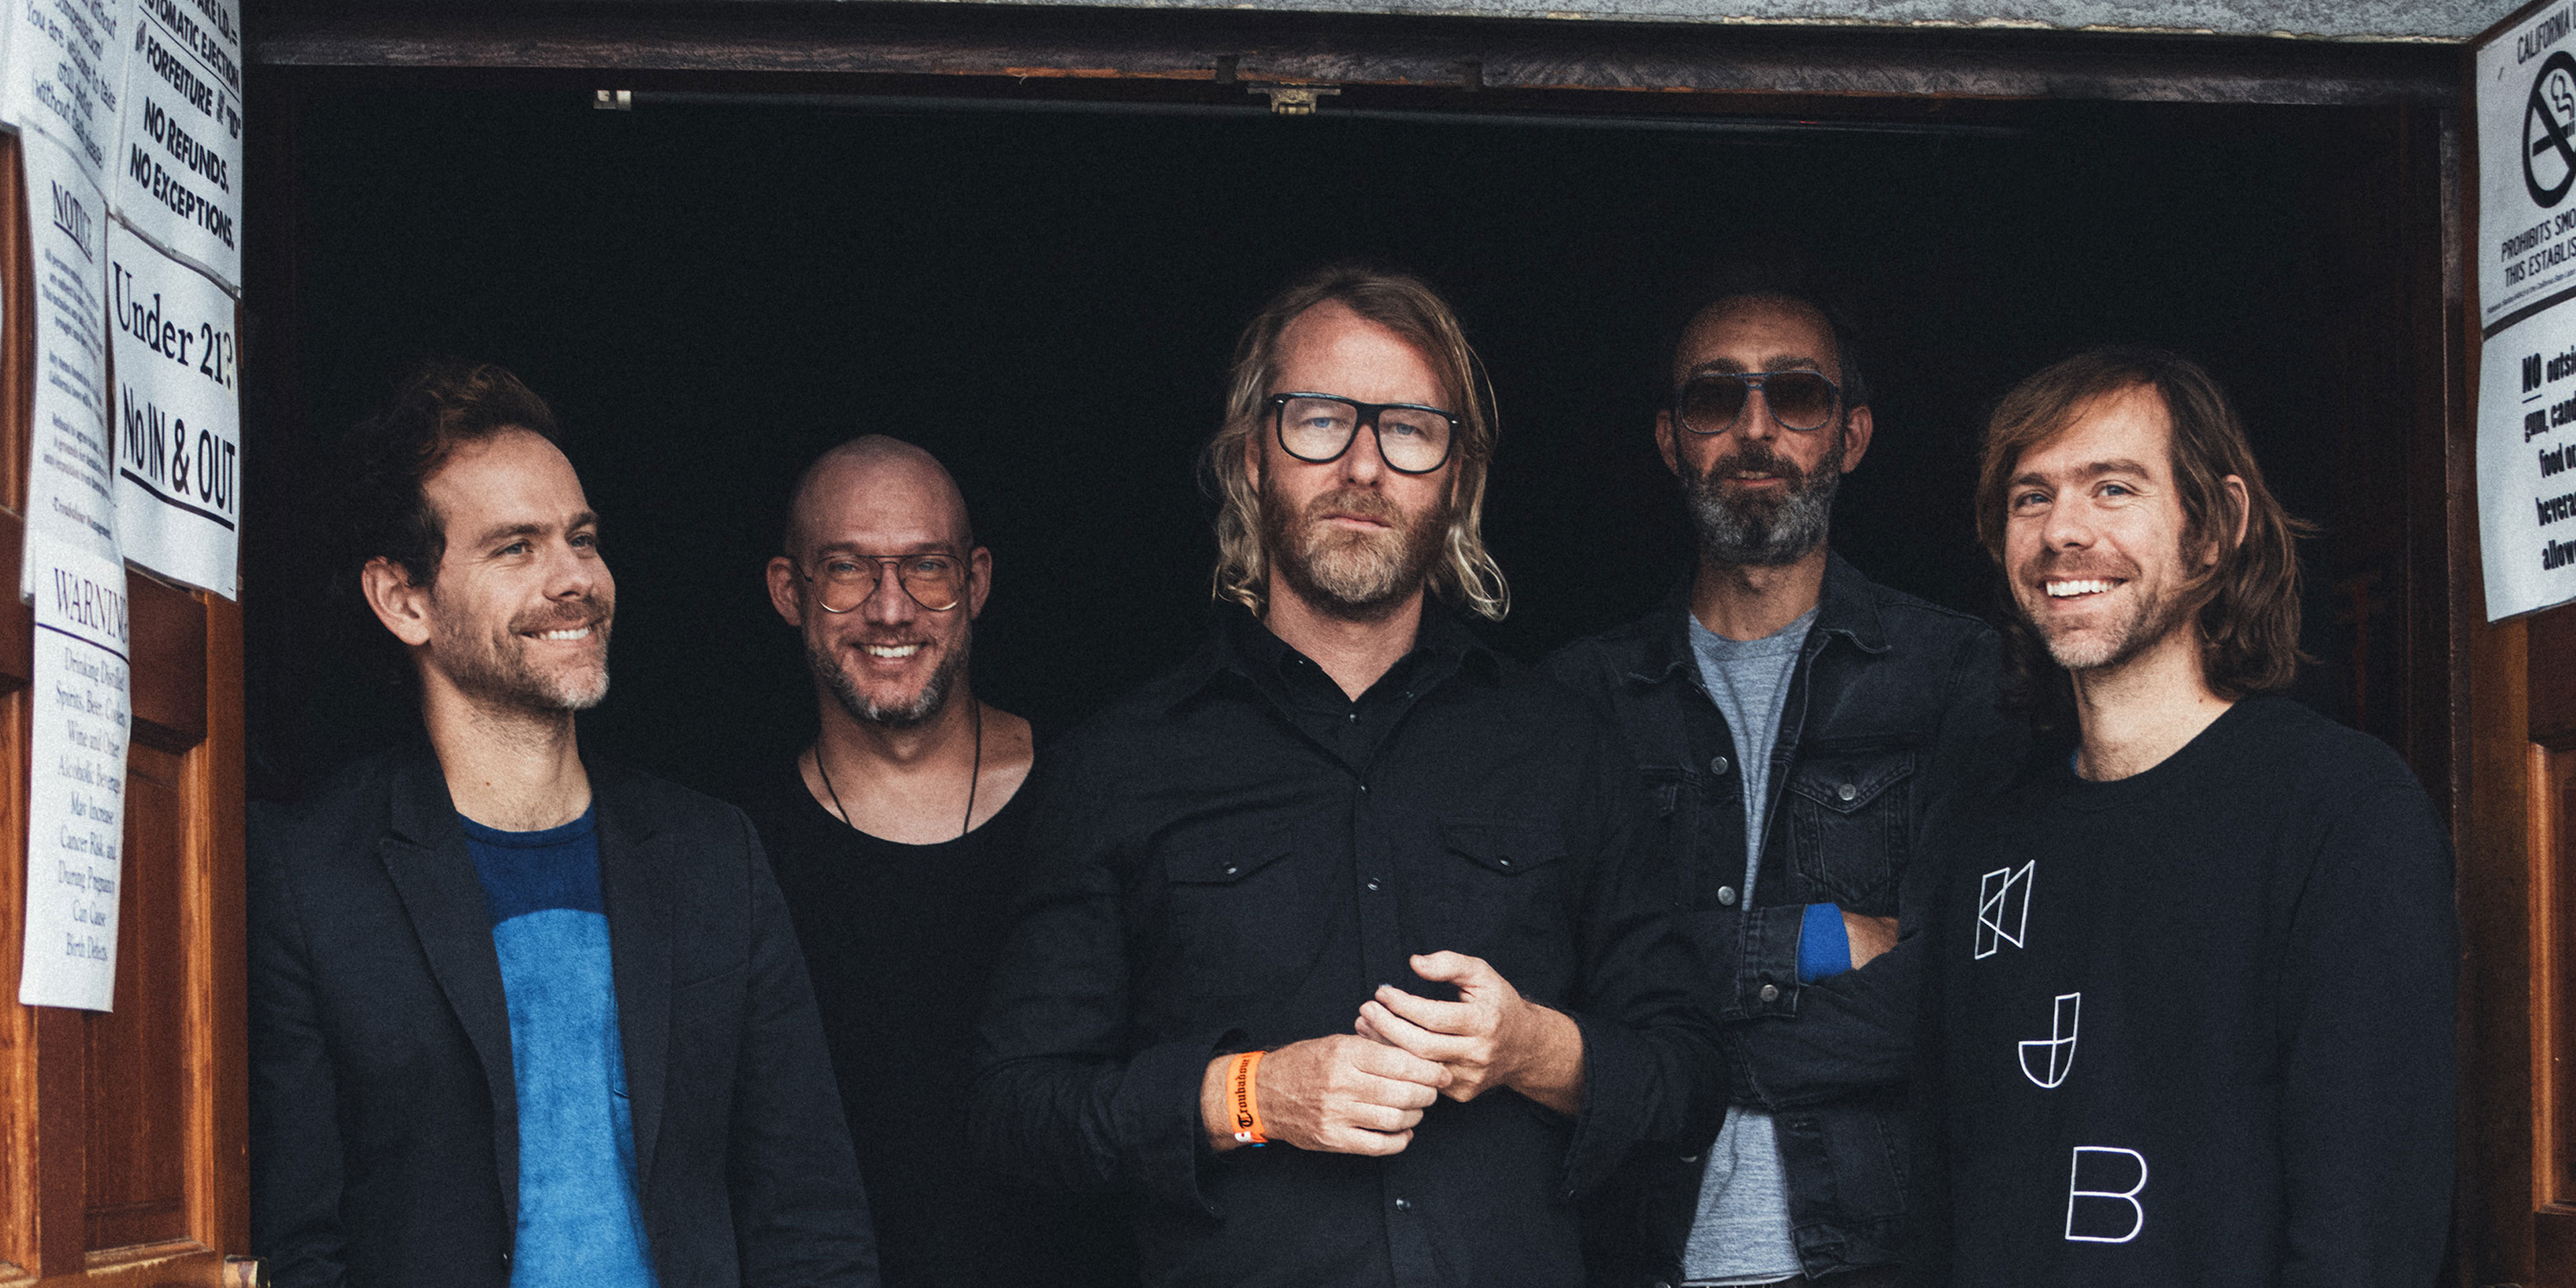 [INDIE ROCK] The National Returns With First Music In Four Years, Announce Album ‘Sleep Well Beast’, World Tour